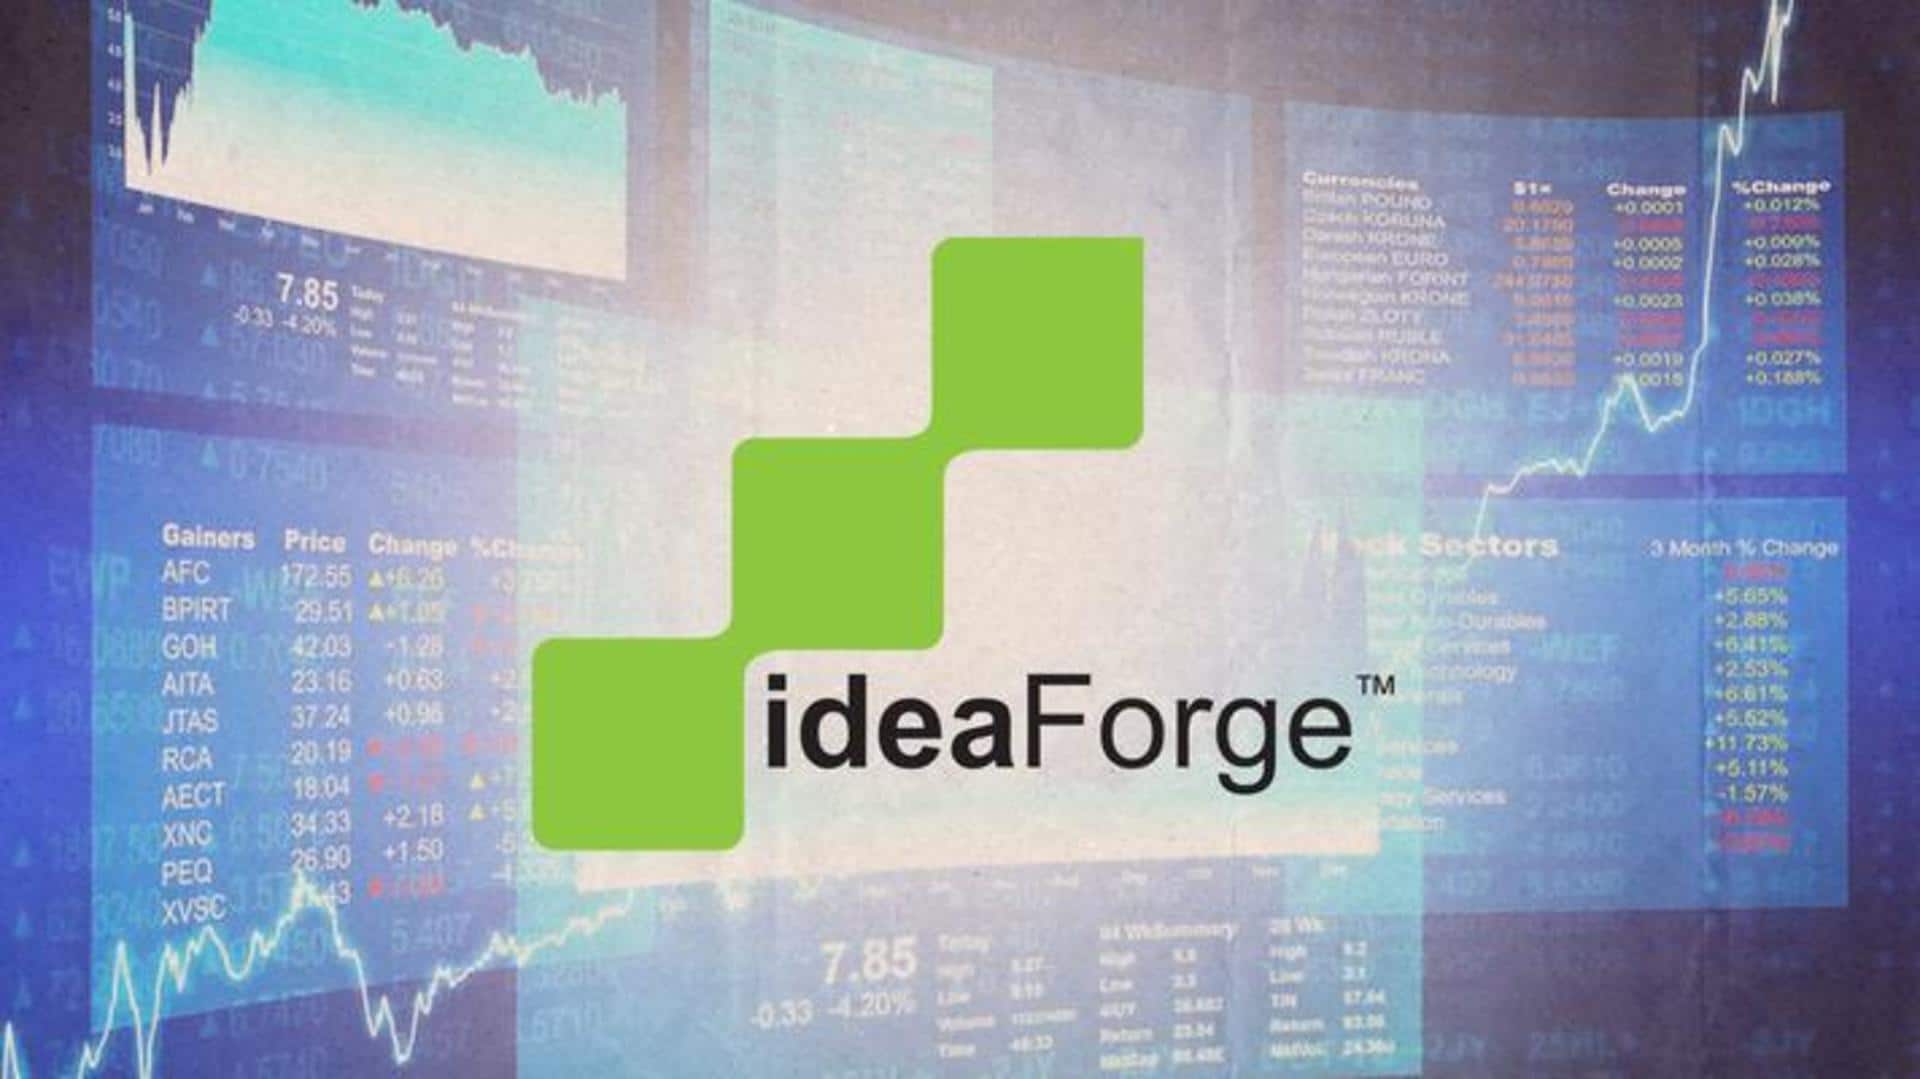 Drone-maker IdeaForge scores bumper IPO listing; doubles investor wealth